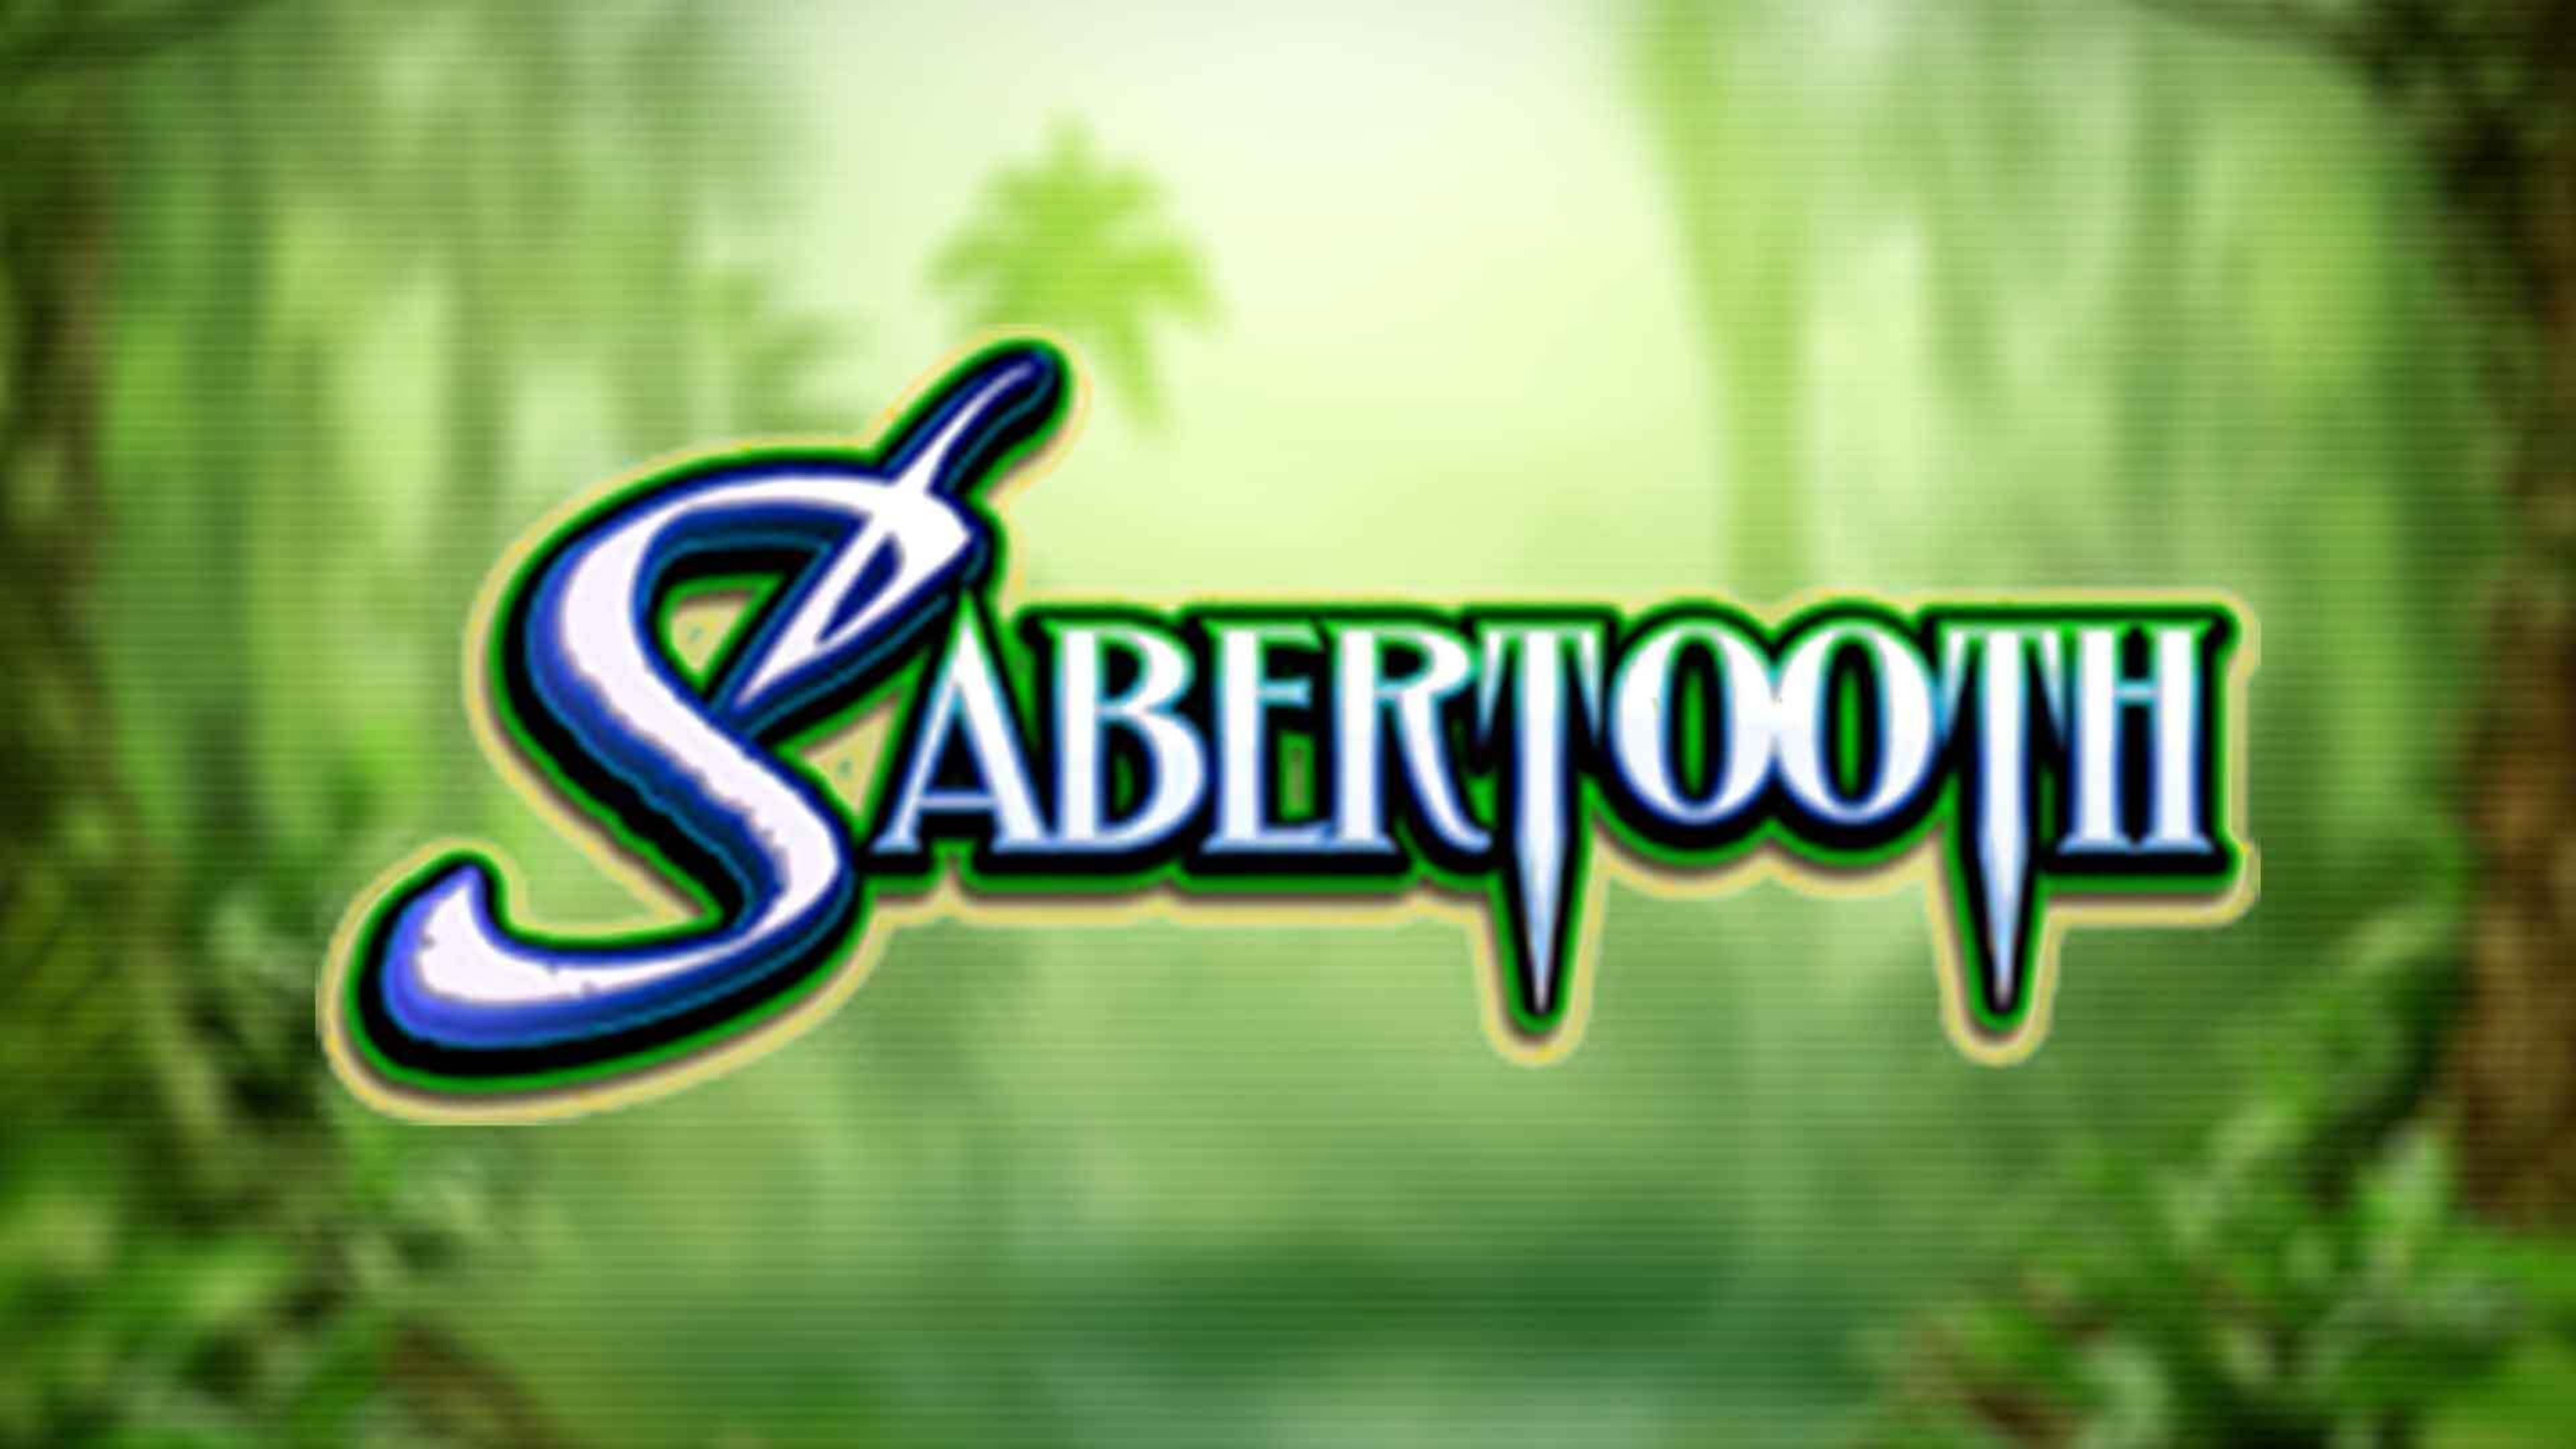 The Sabertooth Online Slot Demo Game by WMS